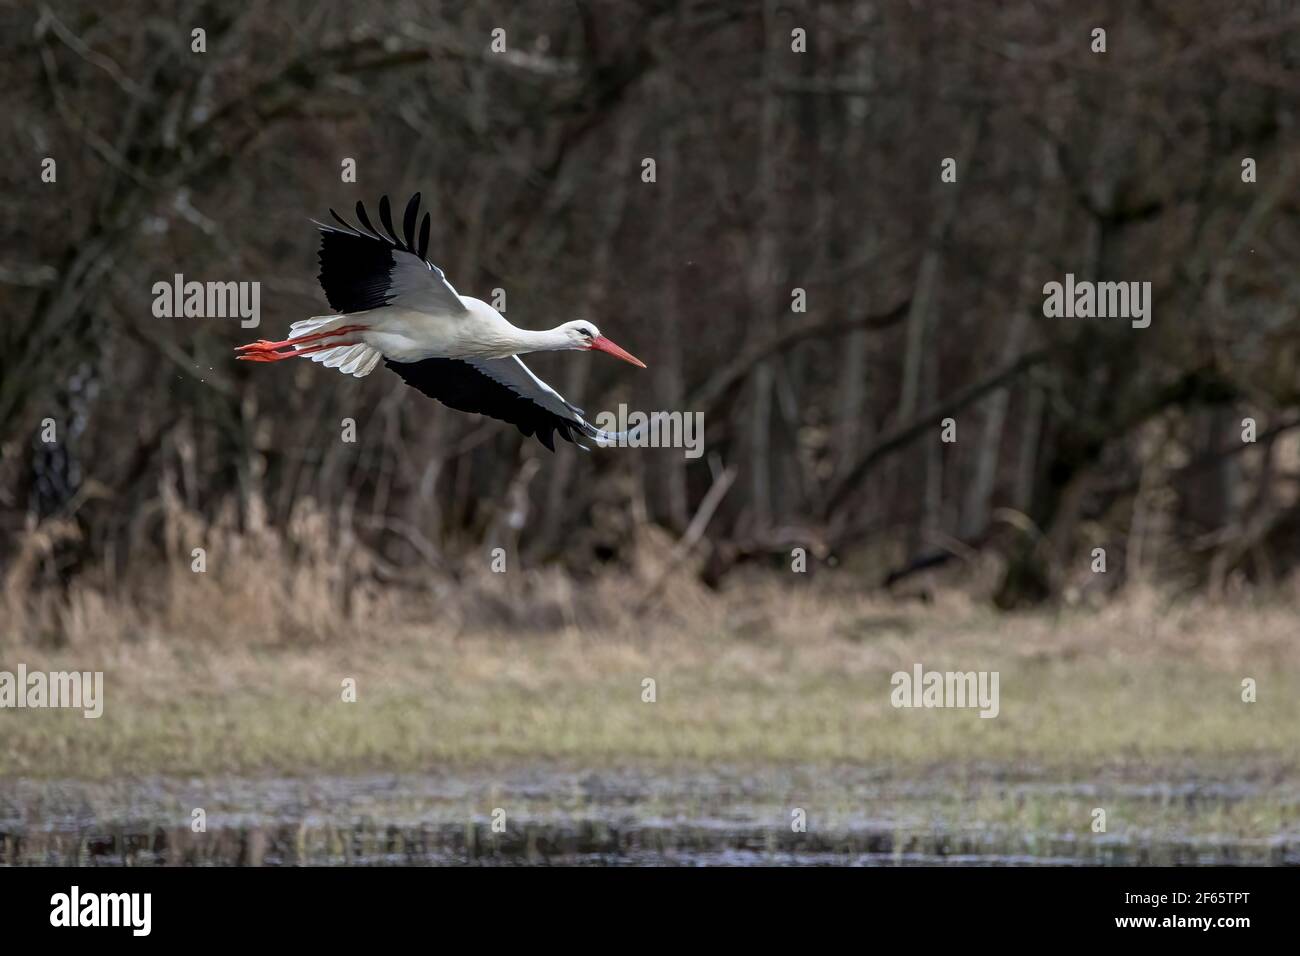 Stork flying over a wet meadow at a little pond called Mönchbruchweiher in the Mönchbruch natural reserve next to Frankfurt in Hesse, Germany. Stock Photo